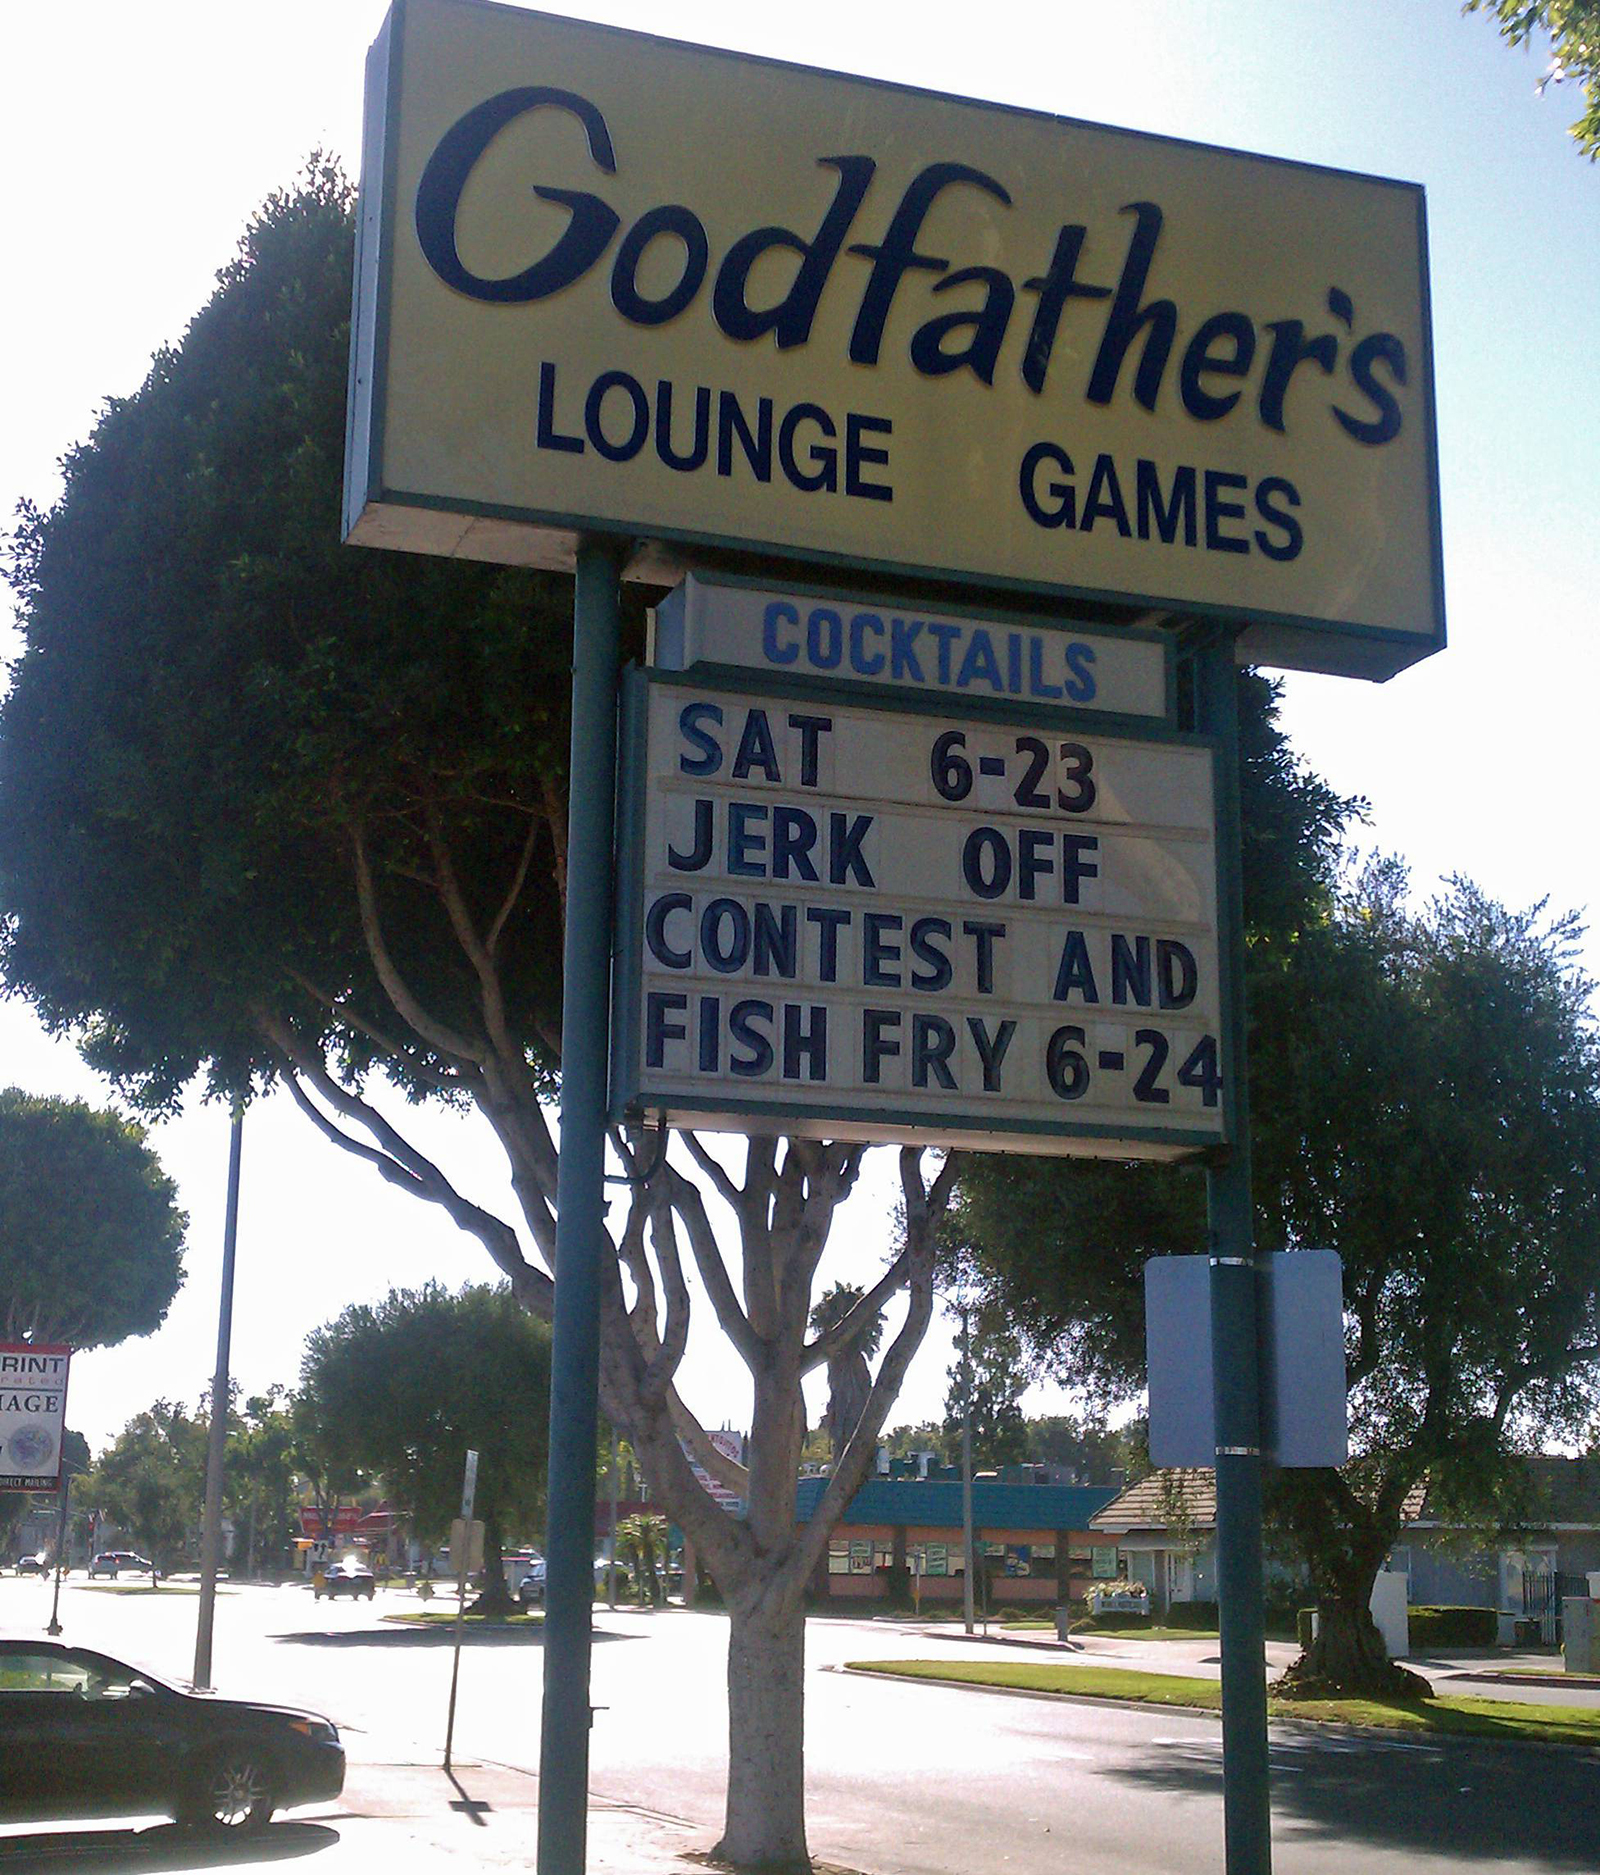 godfathers lounge games - Godfather's Lounge Games Cocktails Sat 623 Jerk Off Contest And Fish Fry 624 1